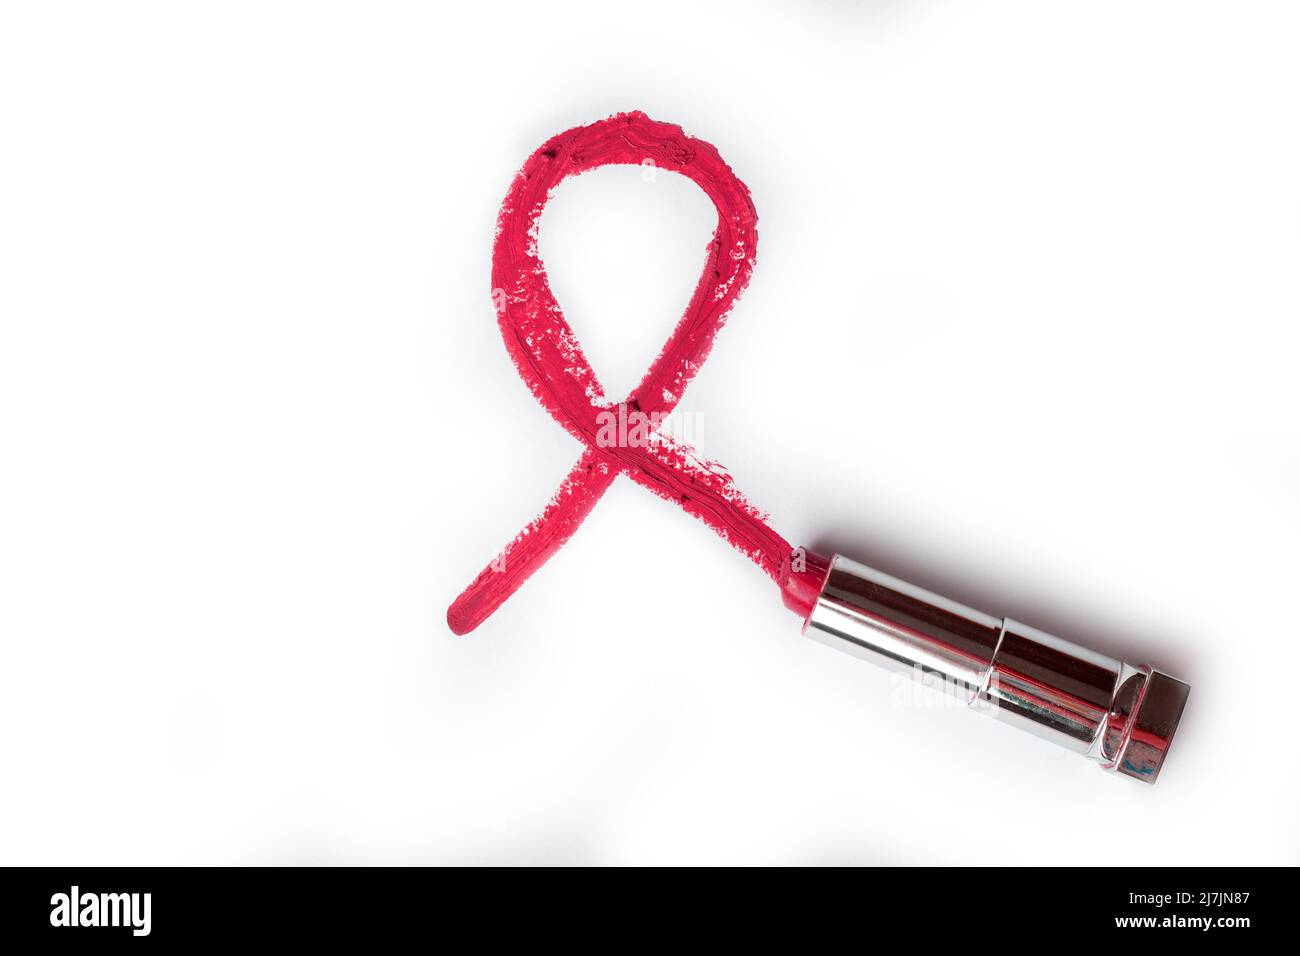 Red lipstick mark as a symbol of solidarity for people living with HIV or AIDS on a white background. World AIDS Day concept. Stock Photo